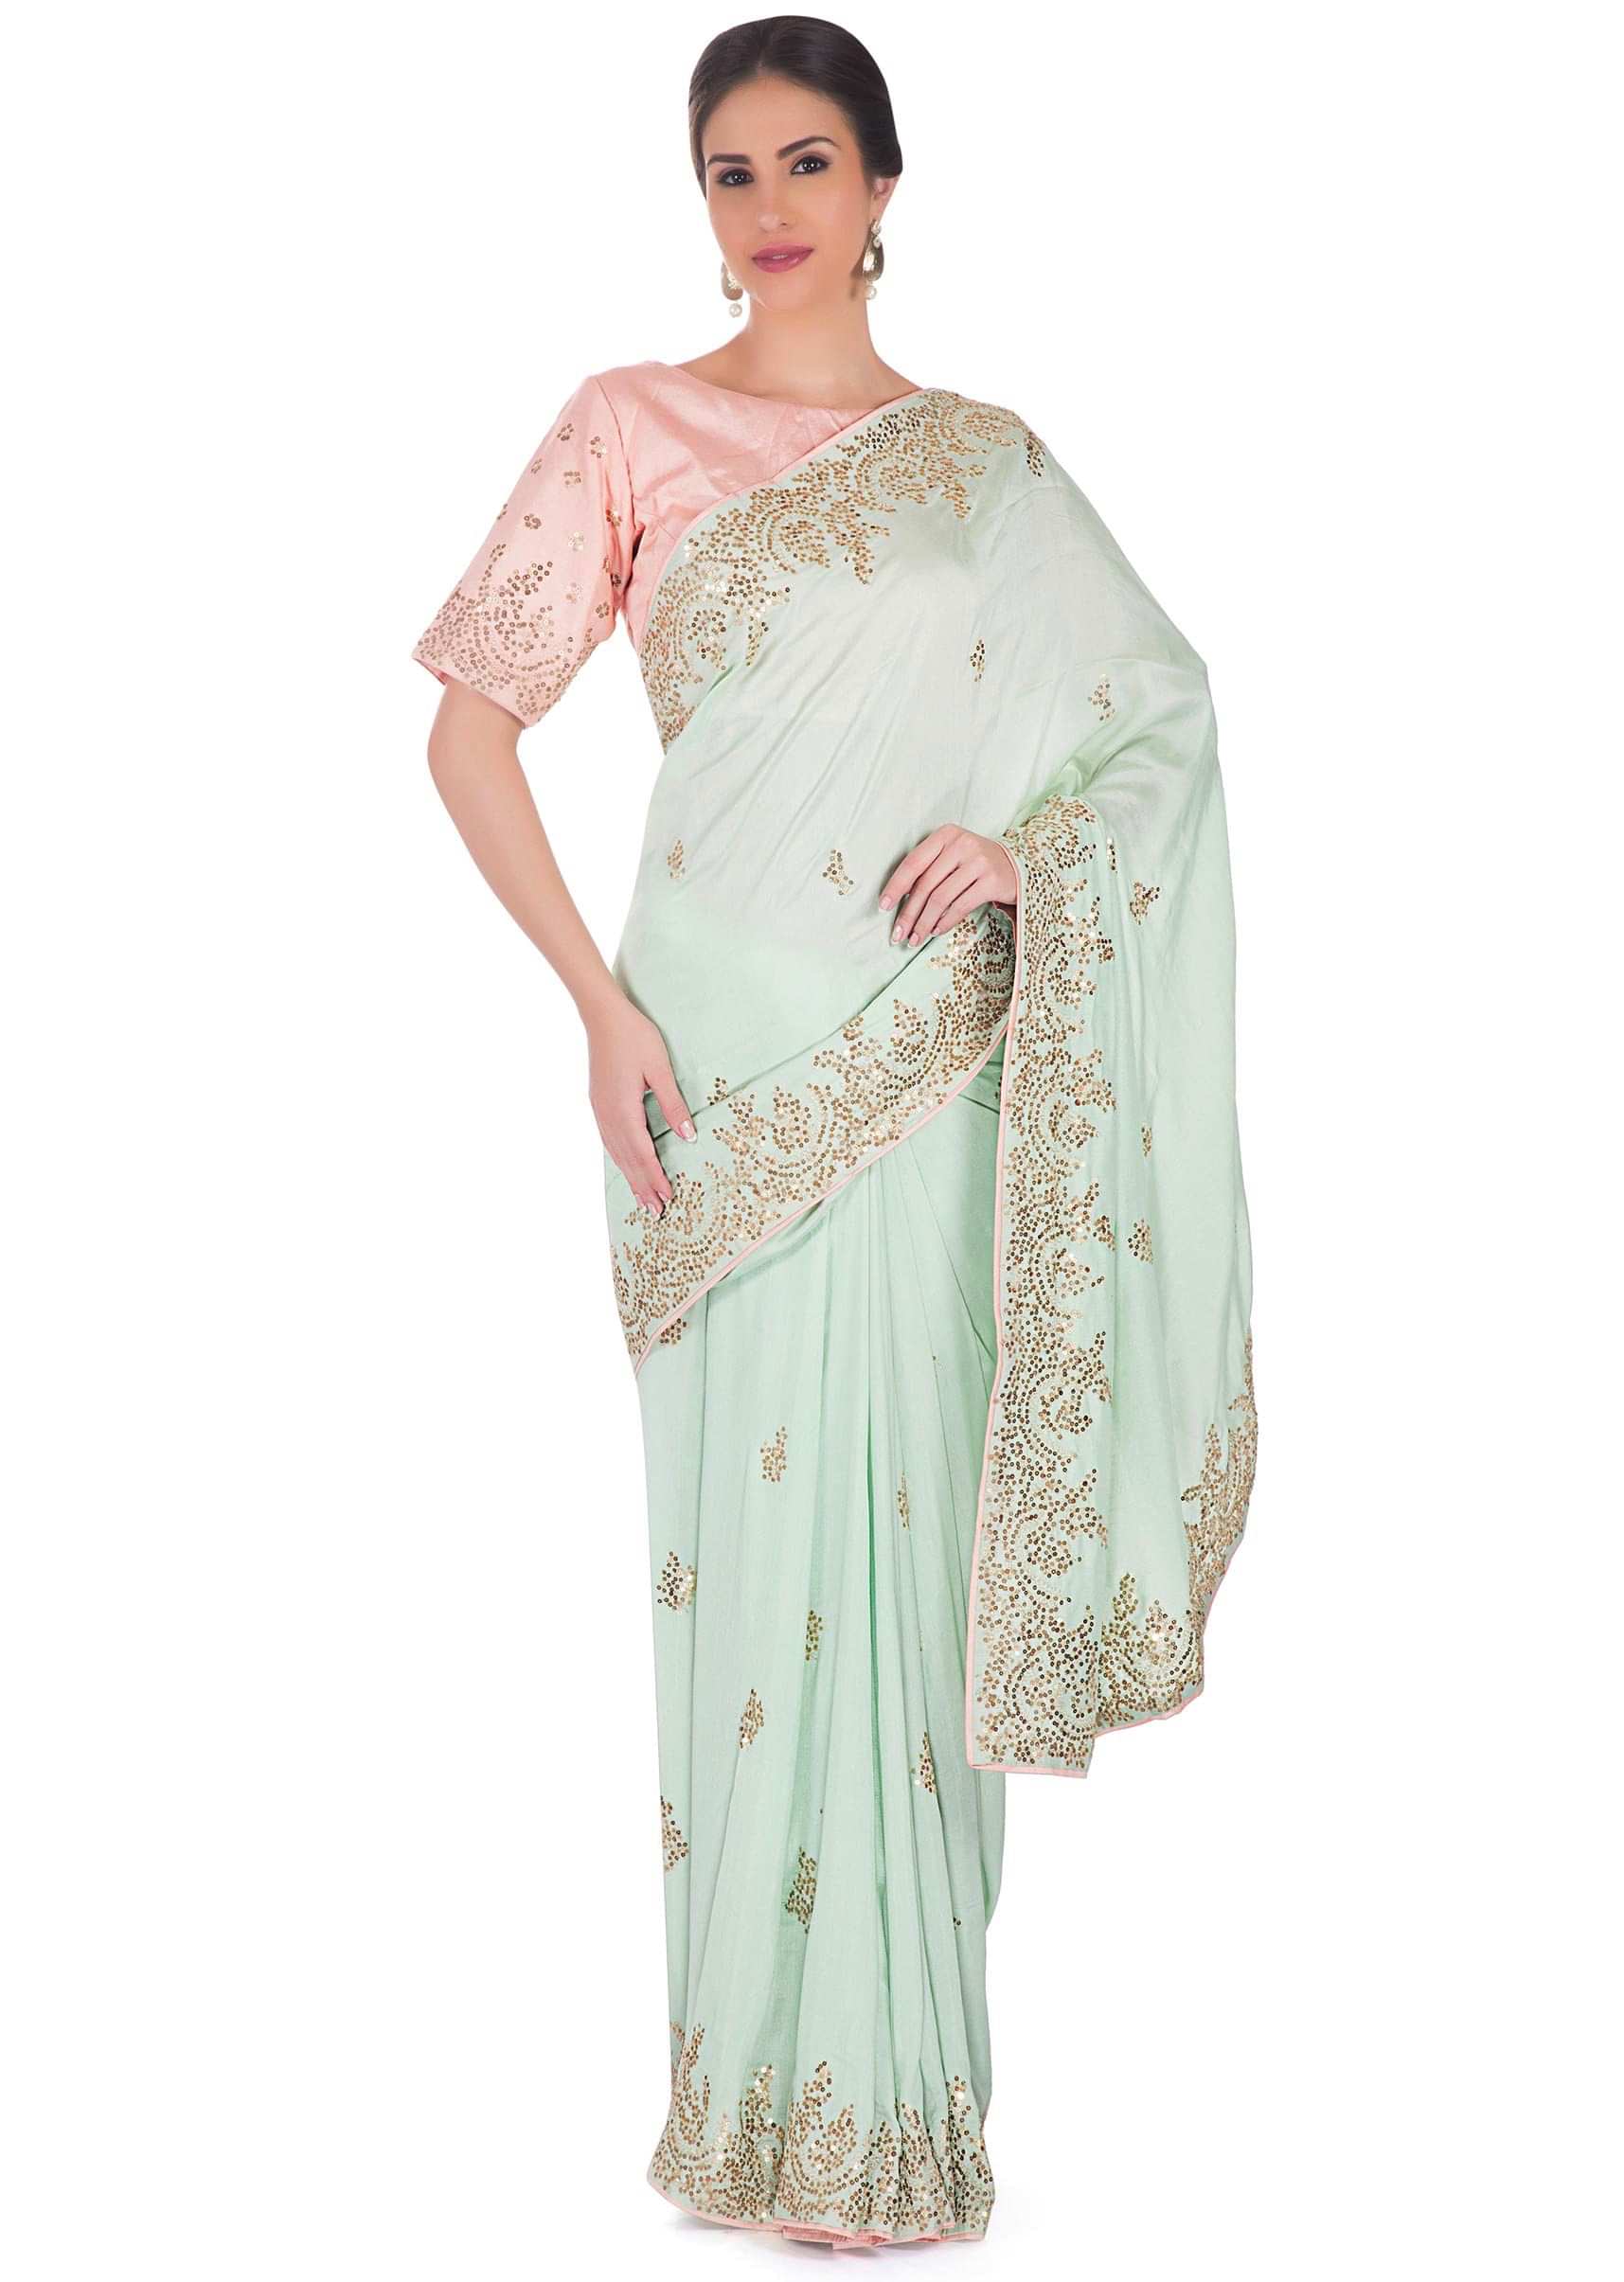 Mint Green Saree In Satin And Pink Pre-Stitched Silk Blouse Adorned With Zari, Sequin Border And Butti Online - Kalki Fashion